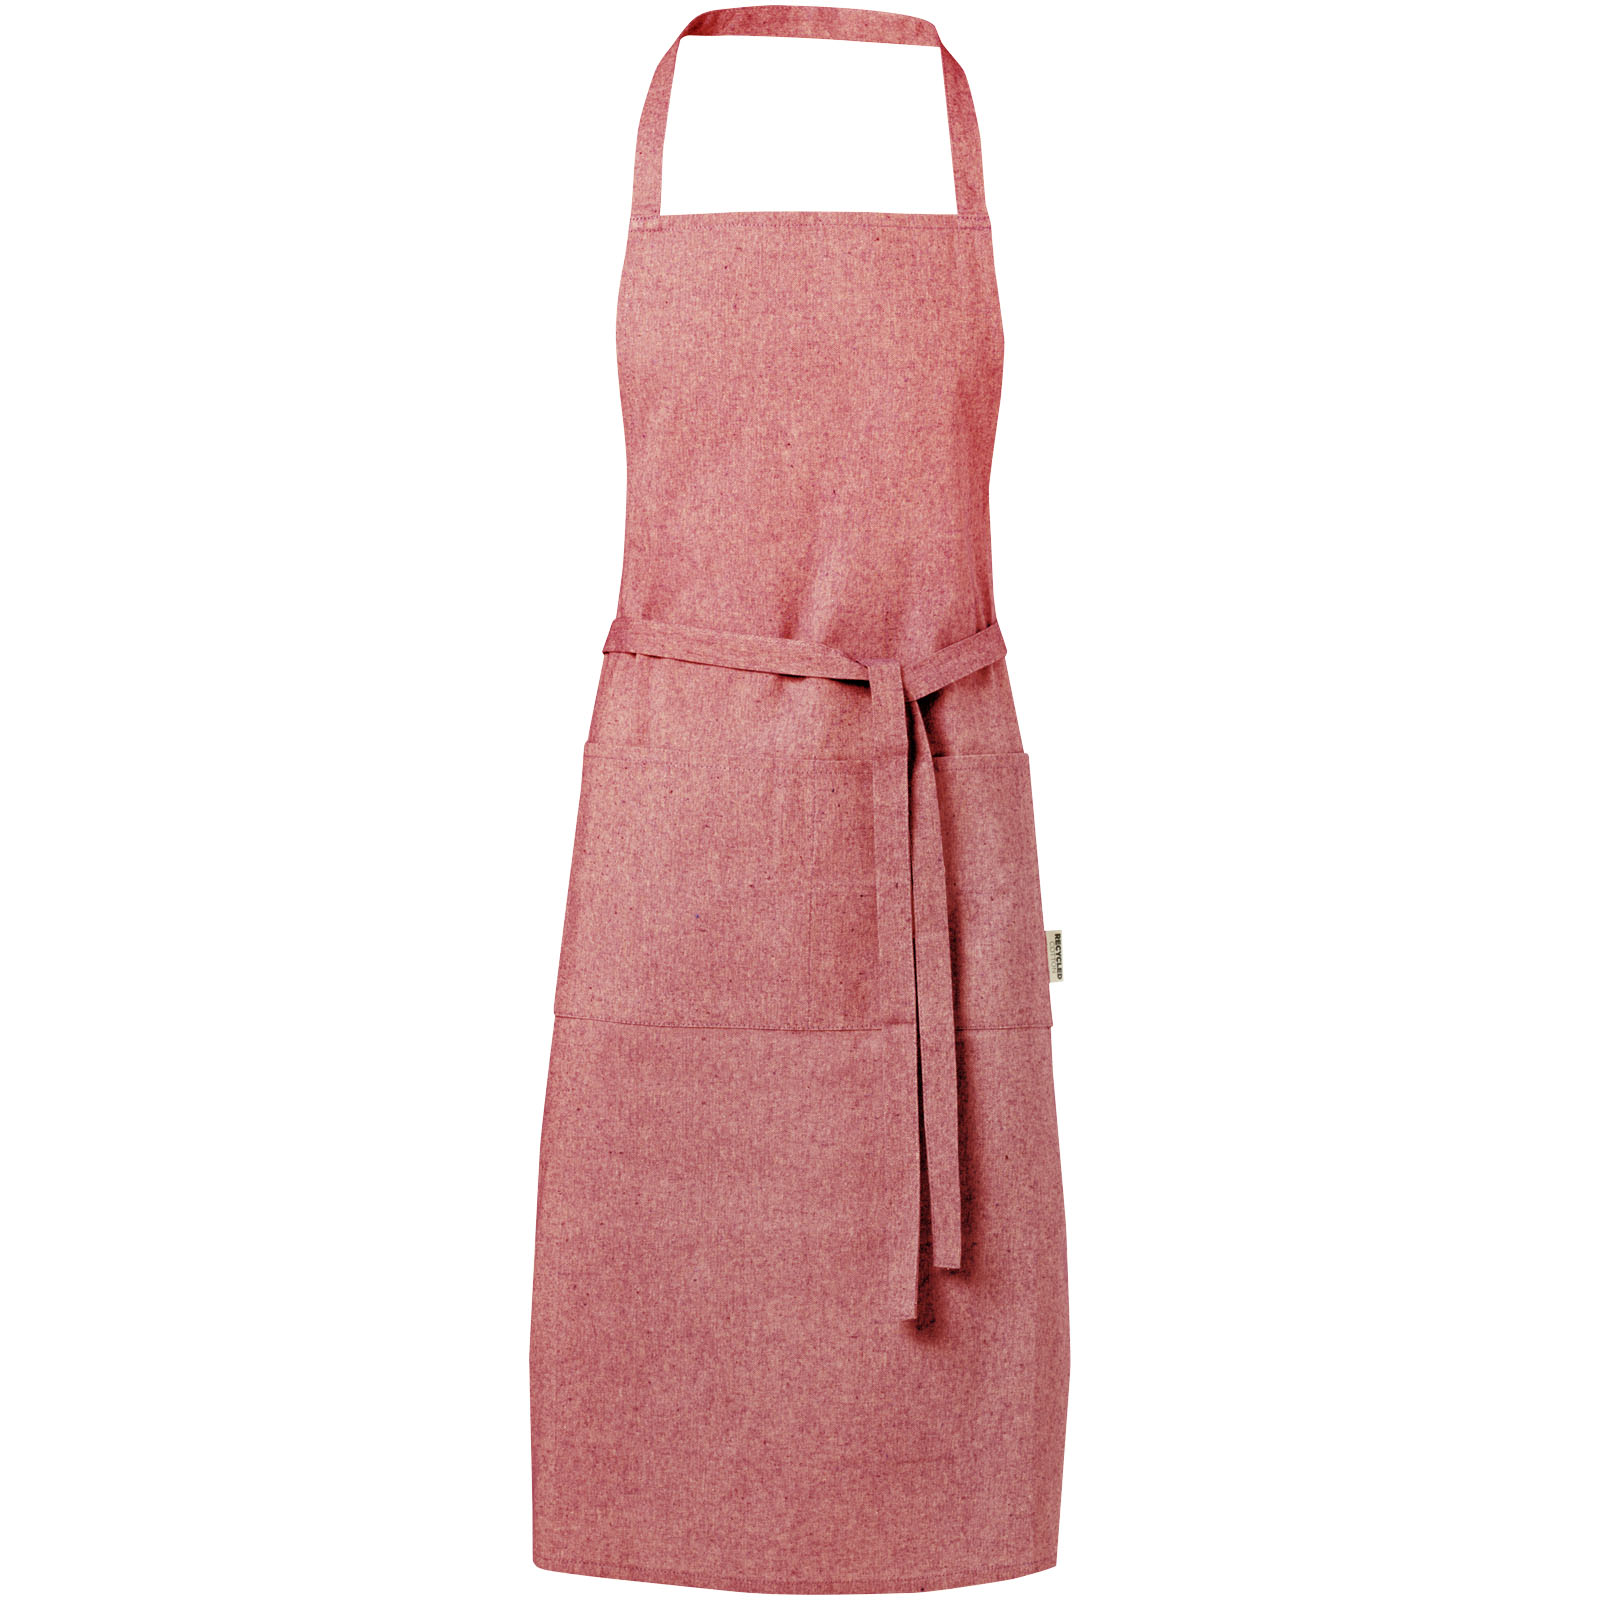 Kitchen apron CREAK made of recycled cotton